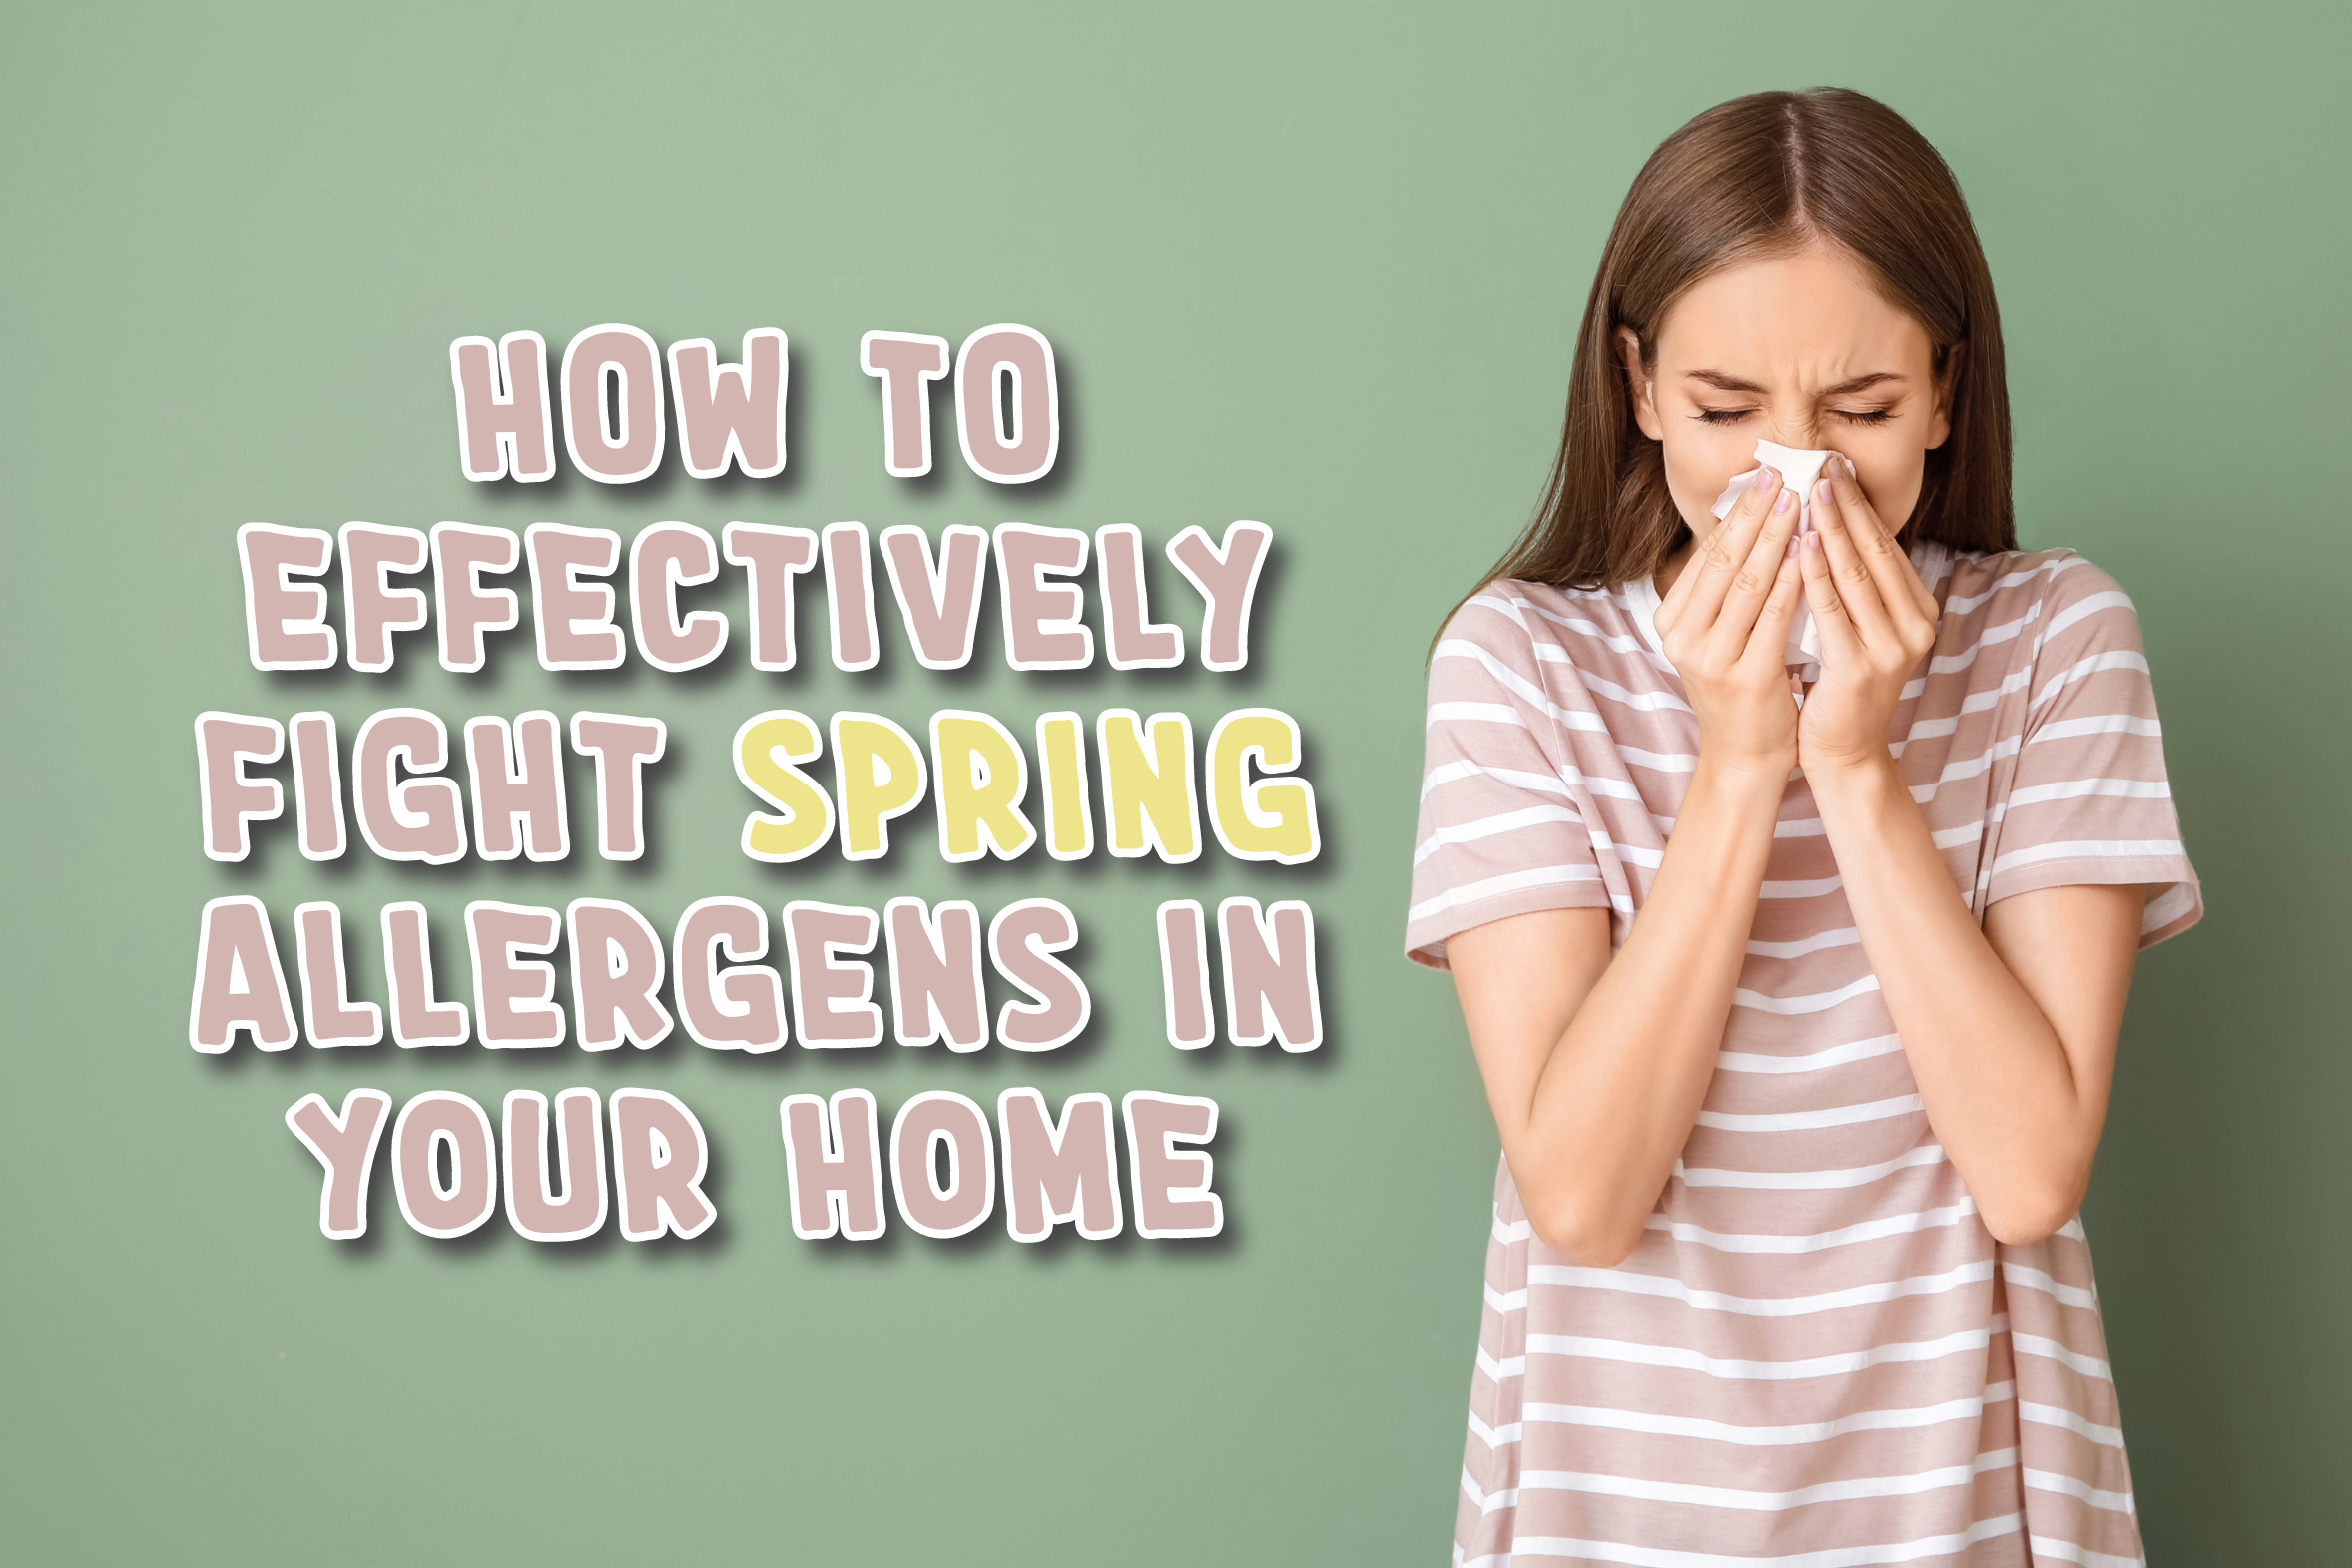 How to Effectively Fight Spring Allergens in Your Home